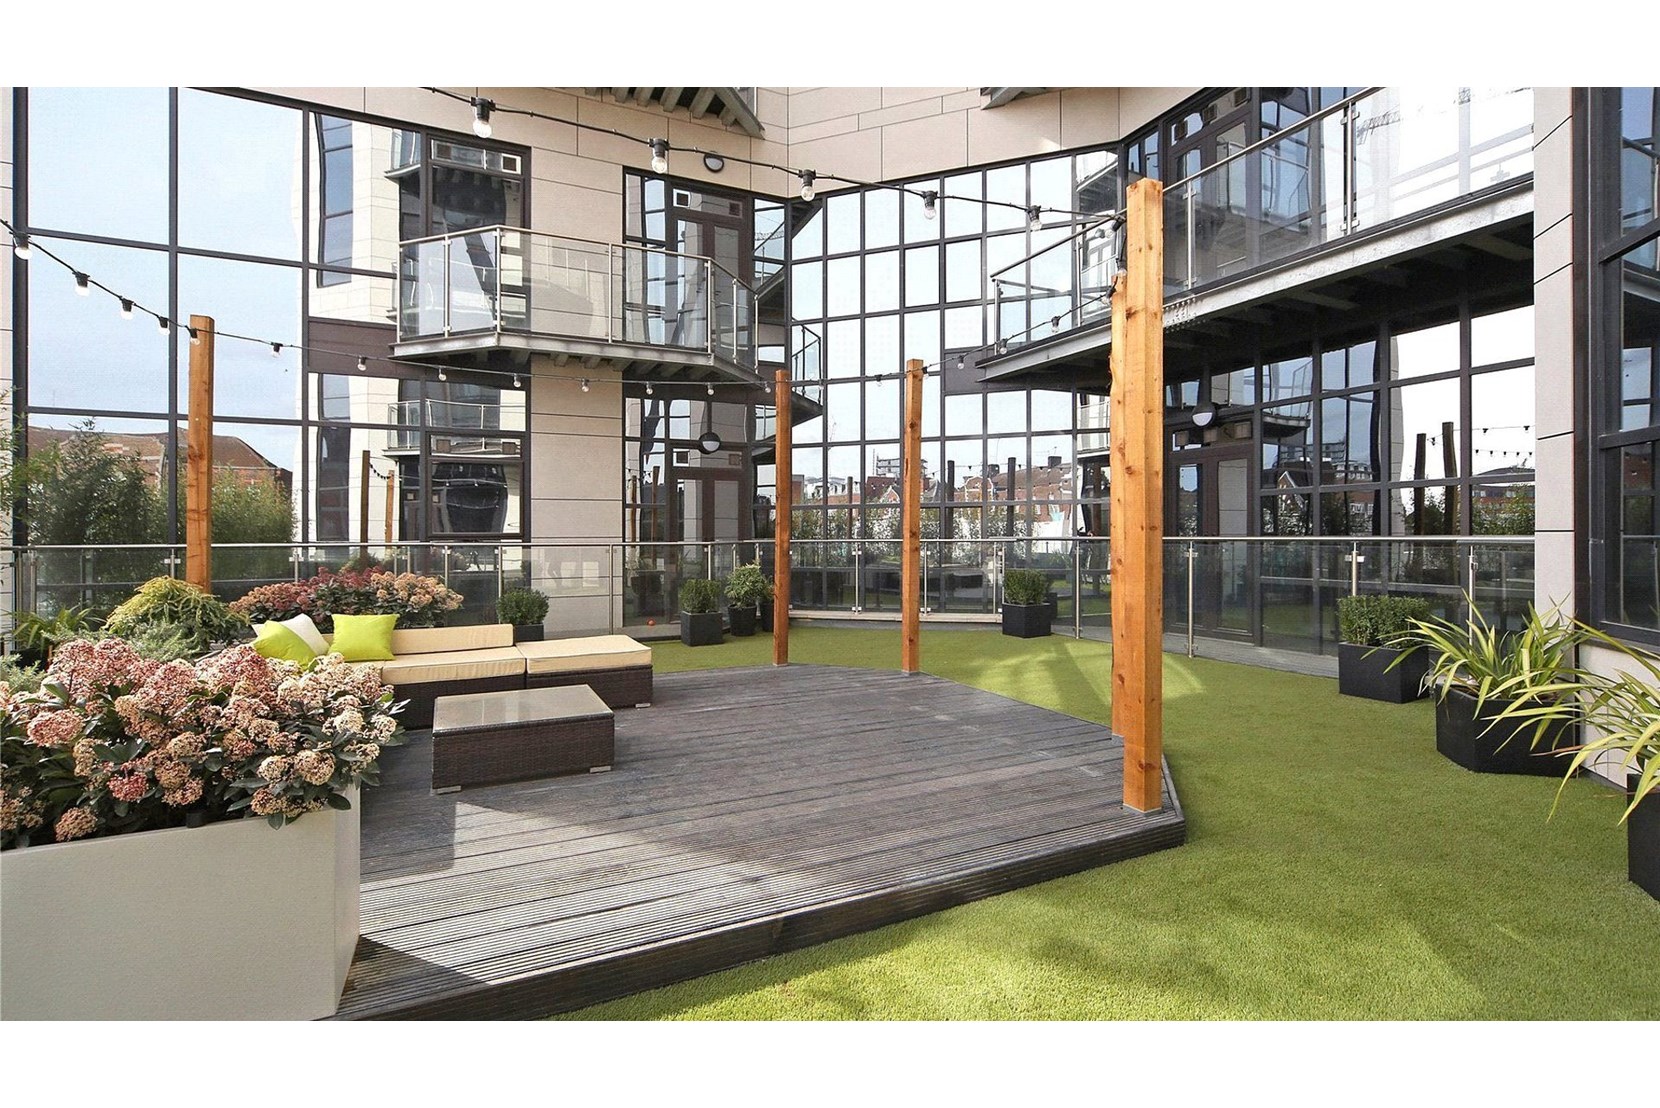 Apartments to Rent by JLL at The Hub, Harrow, HA1, communal gardens